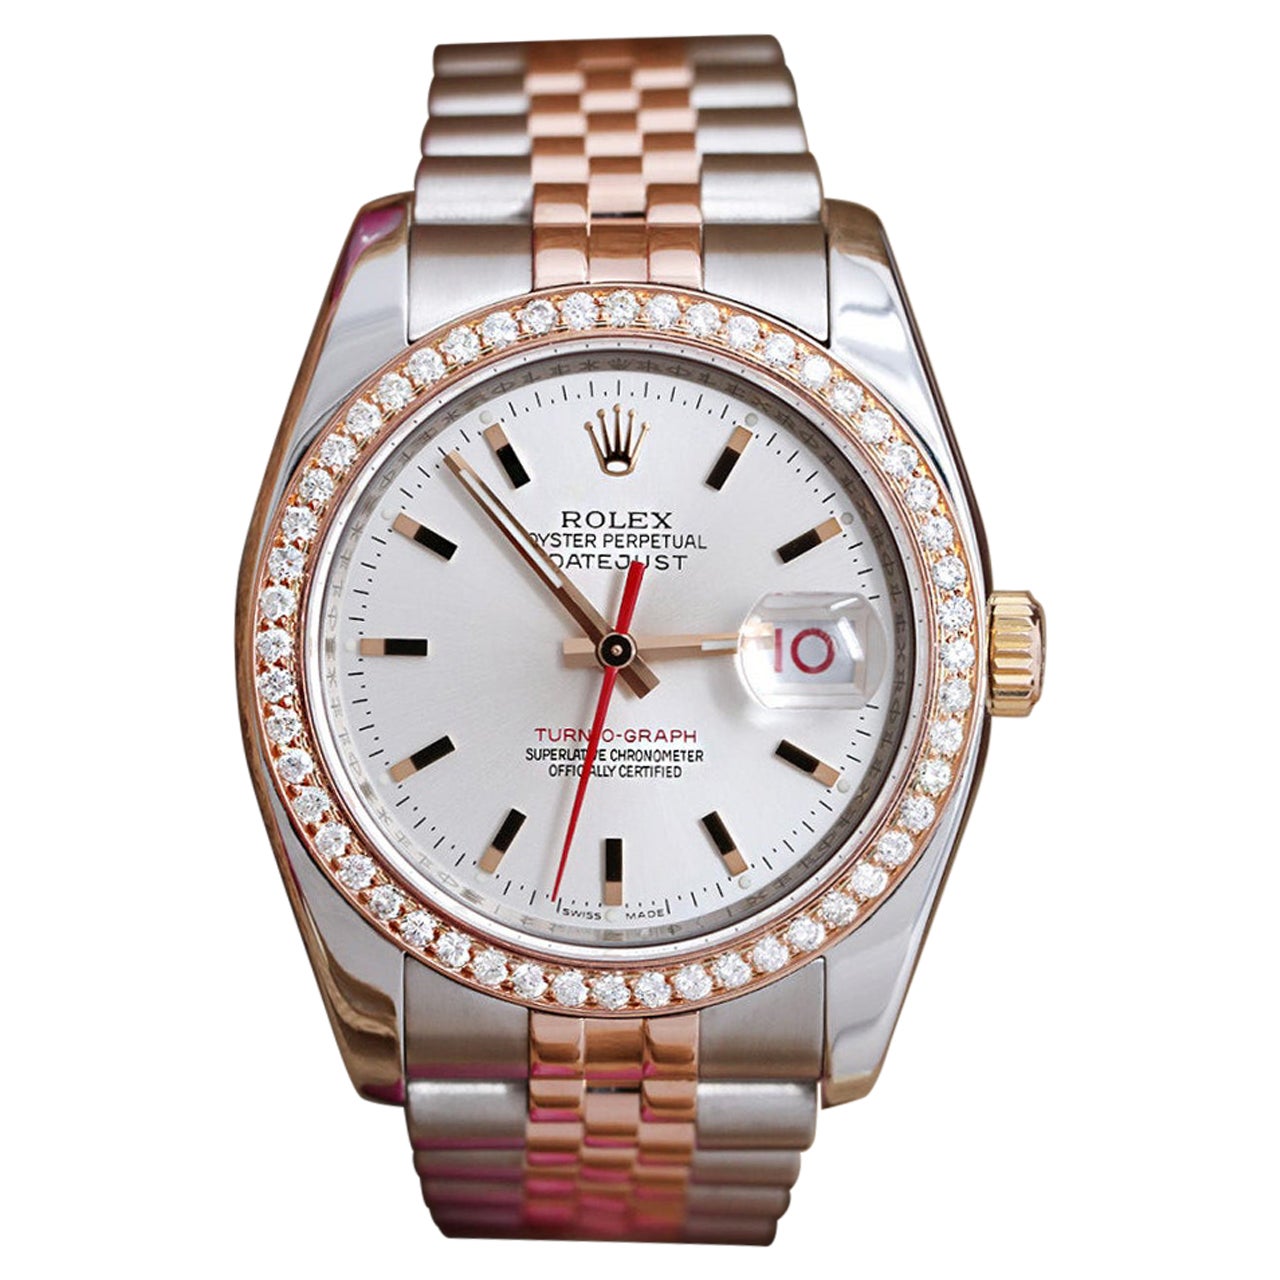 Rolex Datejust Turn-o-graph 116261 Two Tone Stainless Steel and Rose Gold Watch For Sale